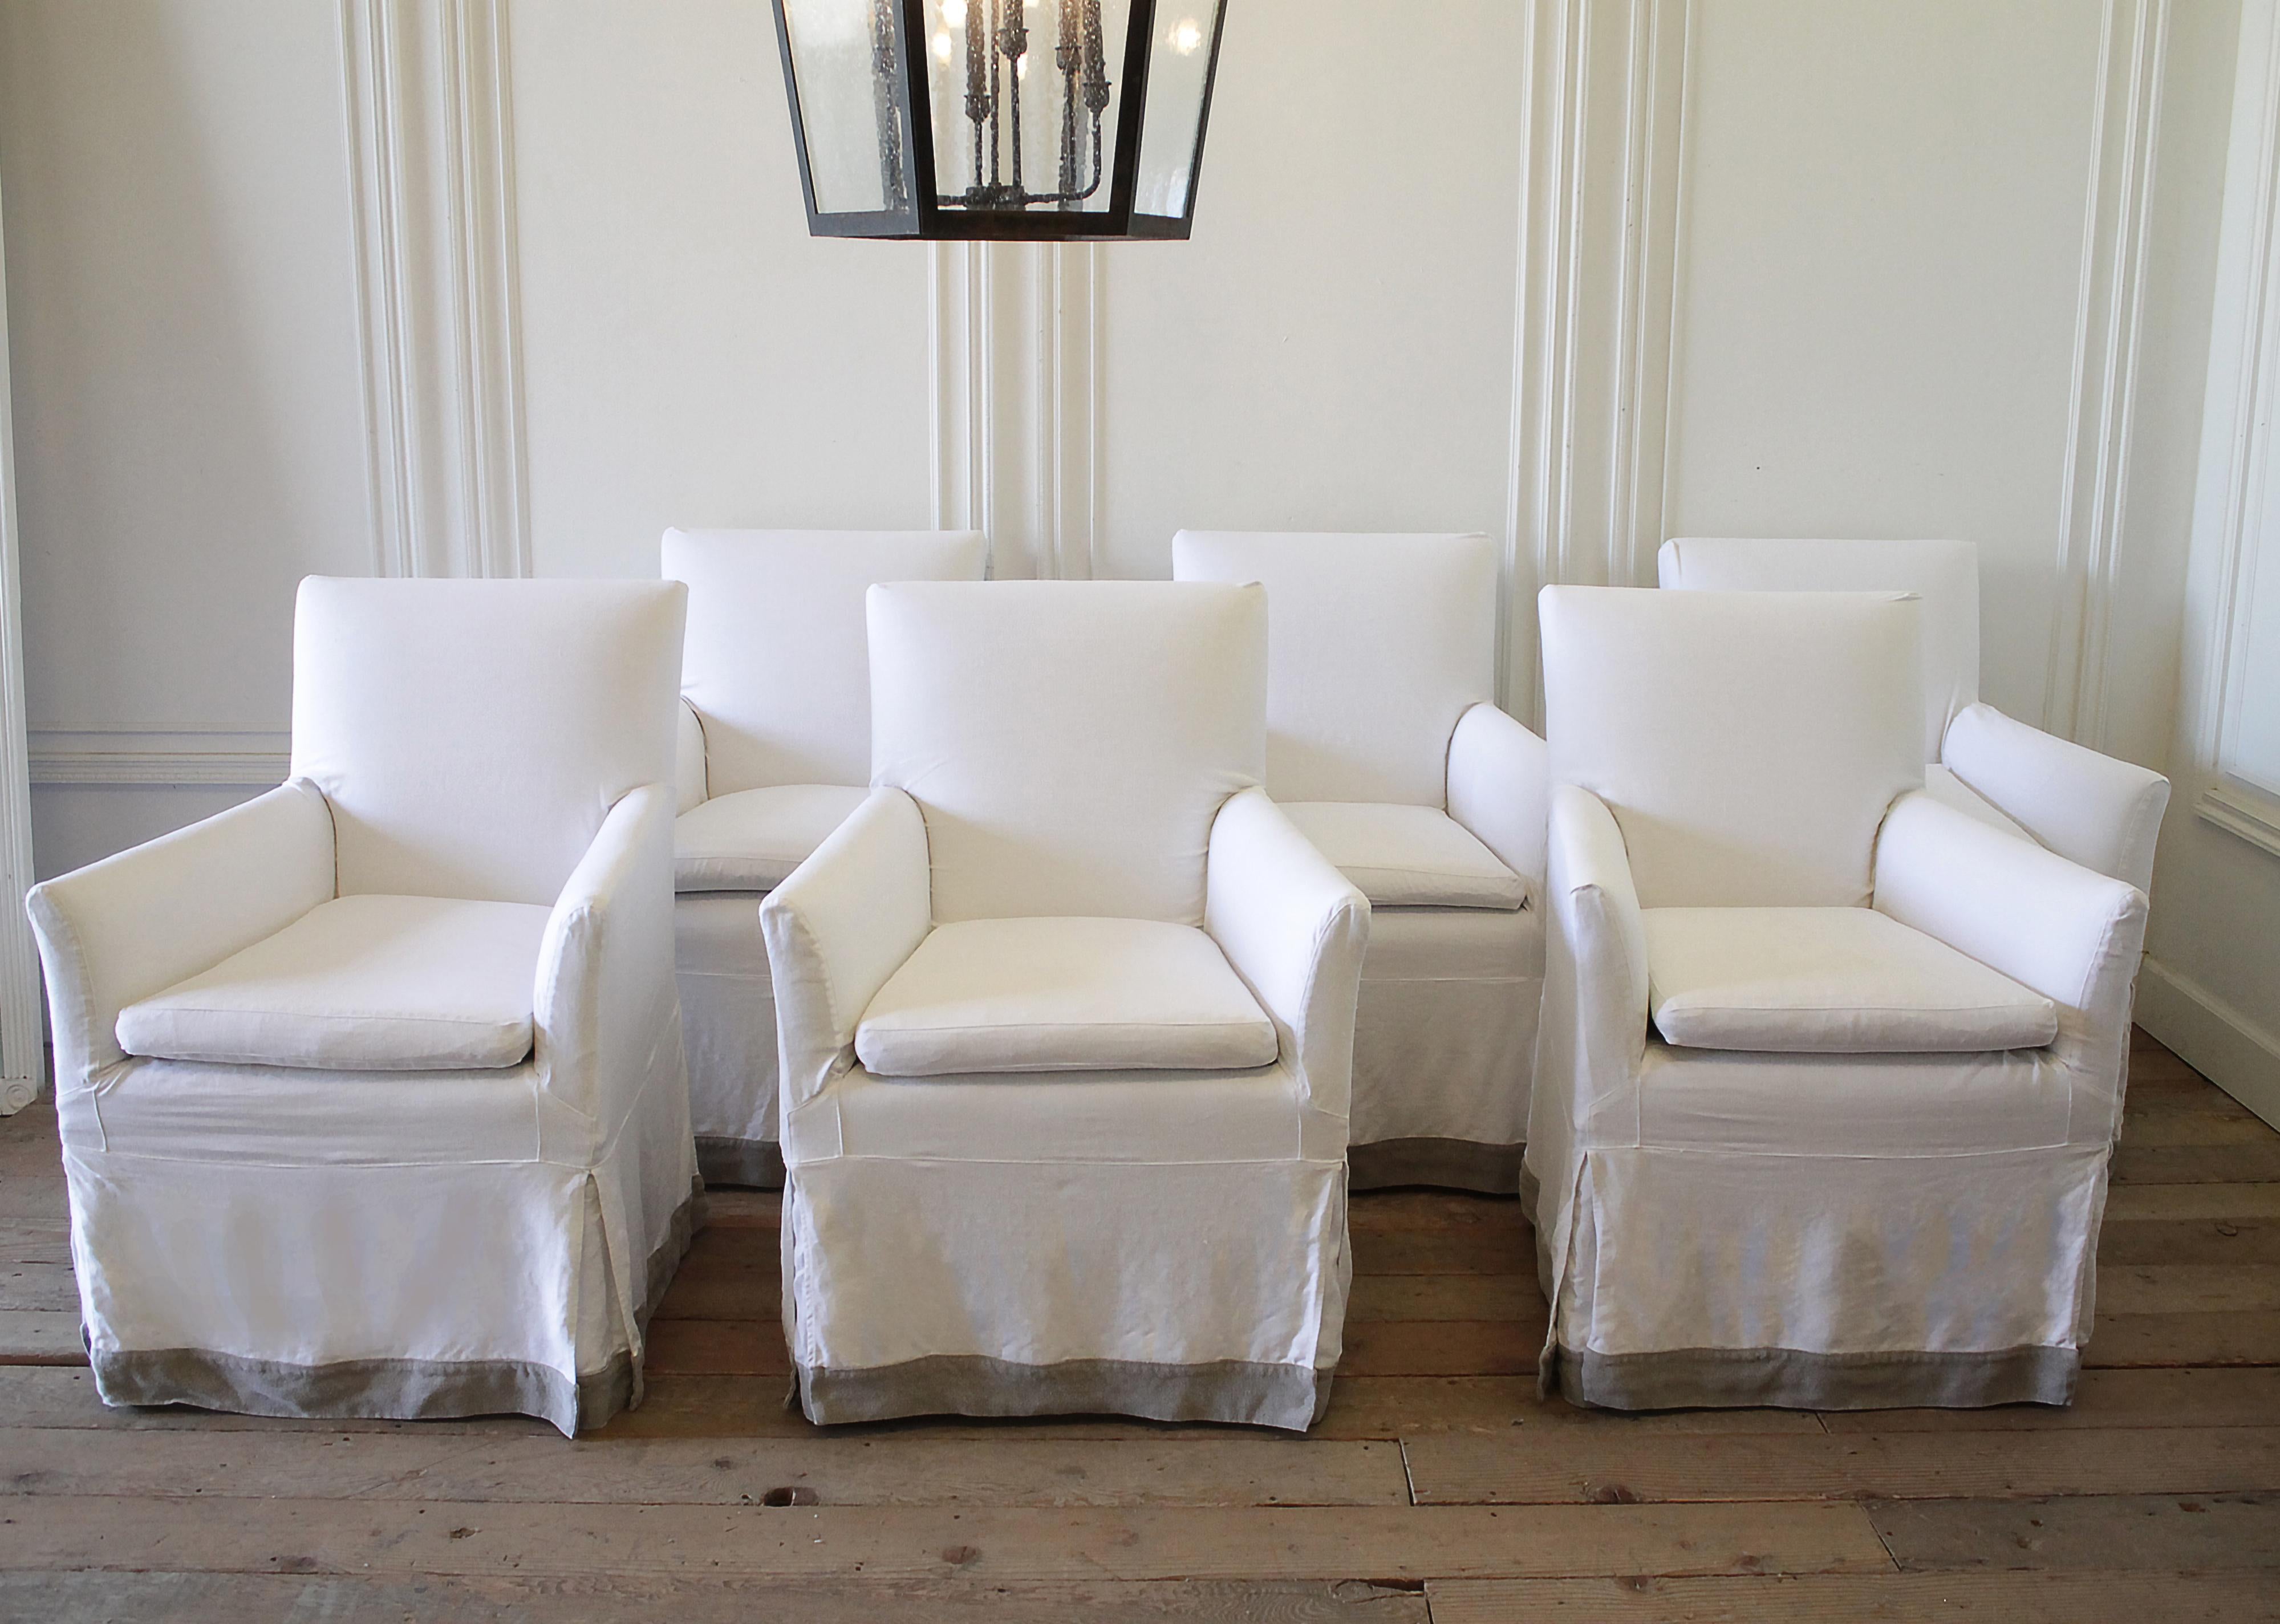 Set of six canvas upholstered arm chairs, with decorative wood legs. Slip covers done in white heavier weight Belgian linen in soft white. We added a decorative accent in natural linen at the bottom of the slip covers. 3